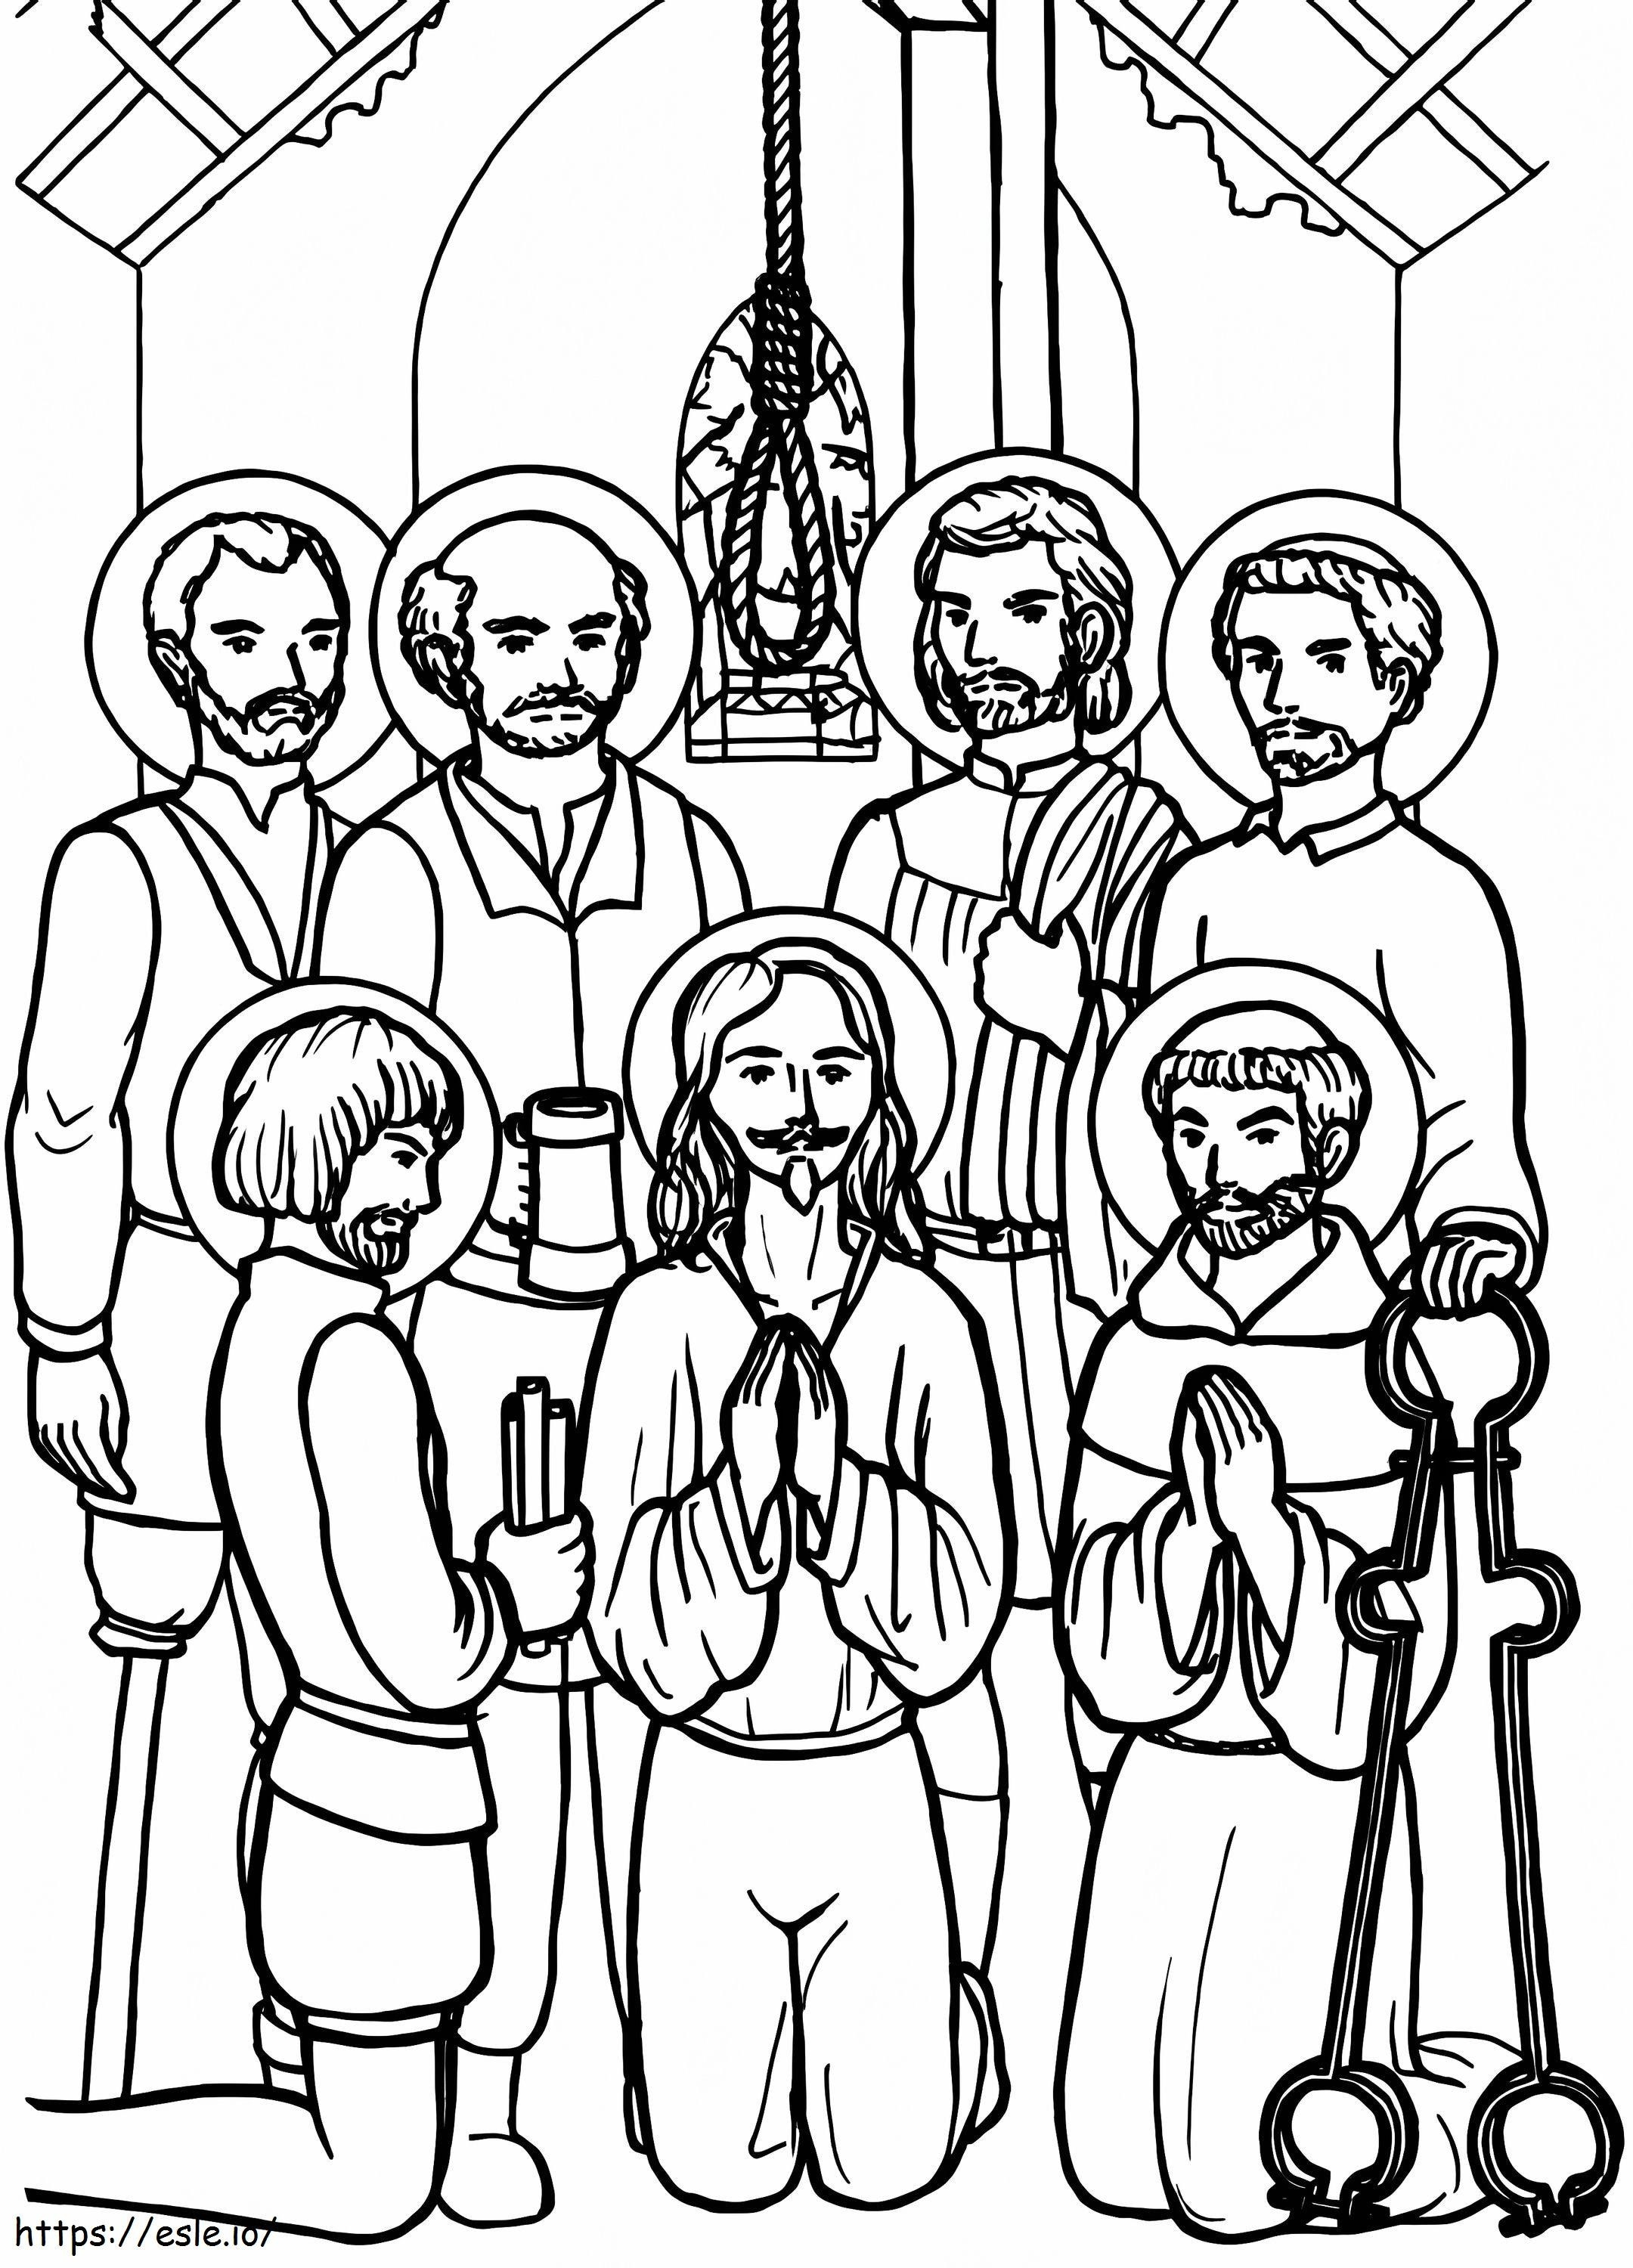 All Saints Day 7 coloring page